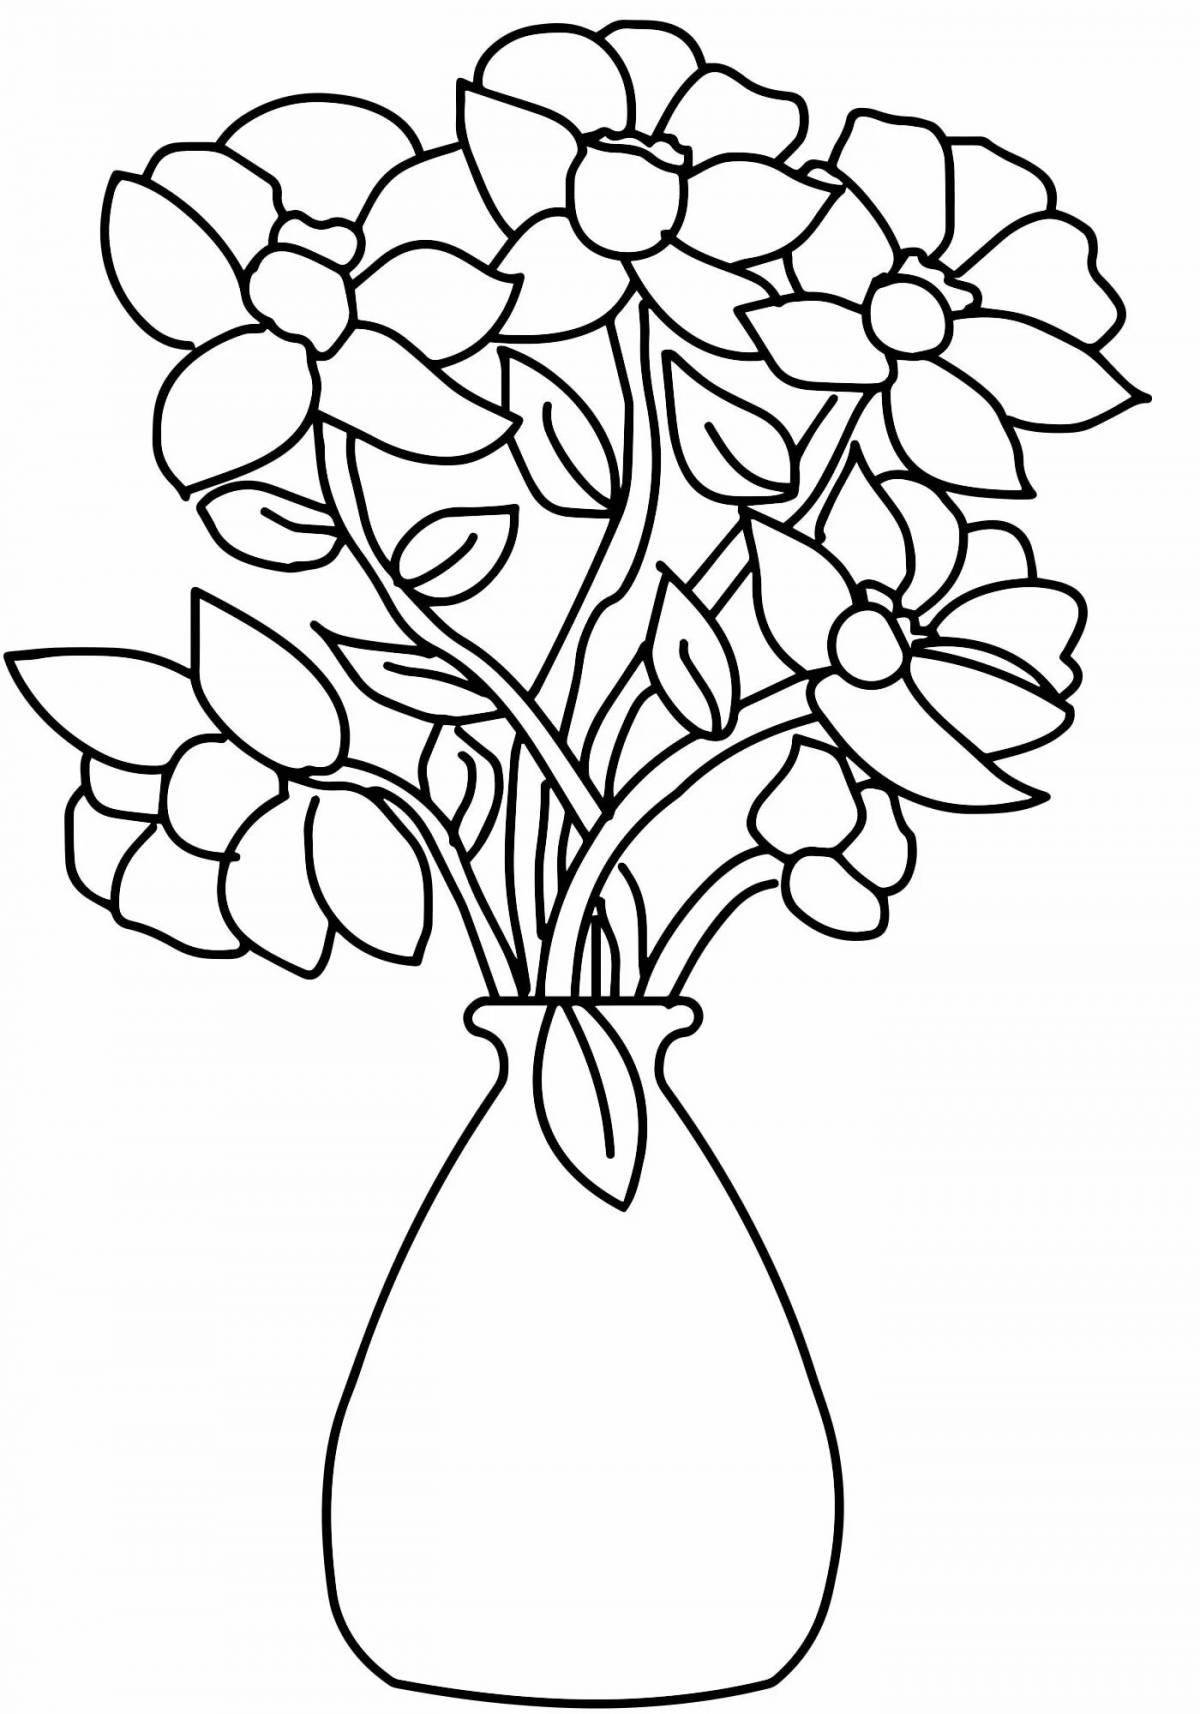 Sparkling coloring flowers in a vase for kids